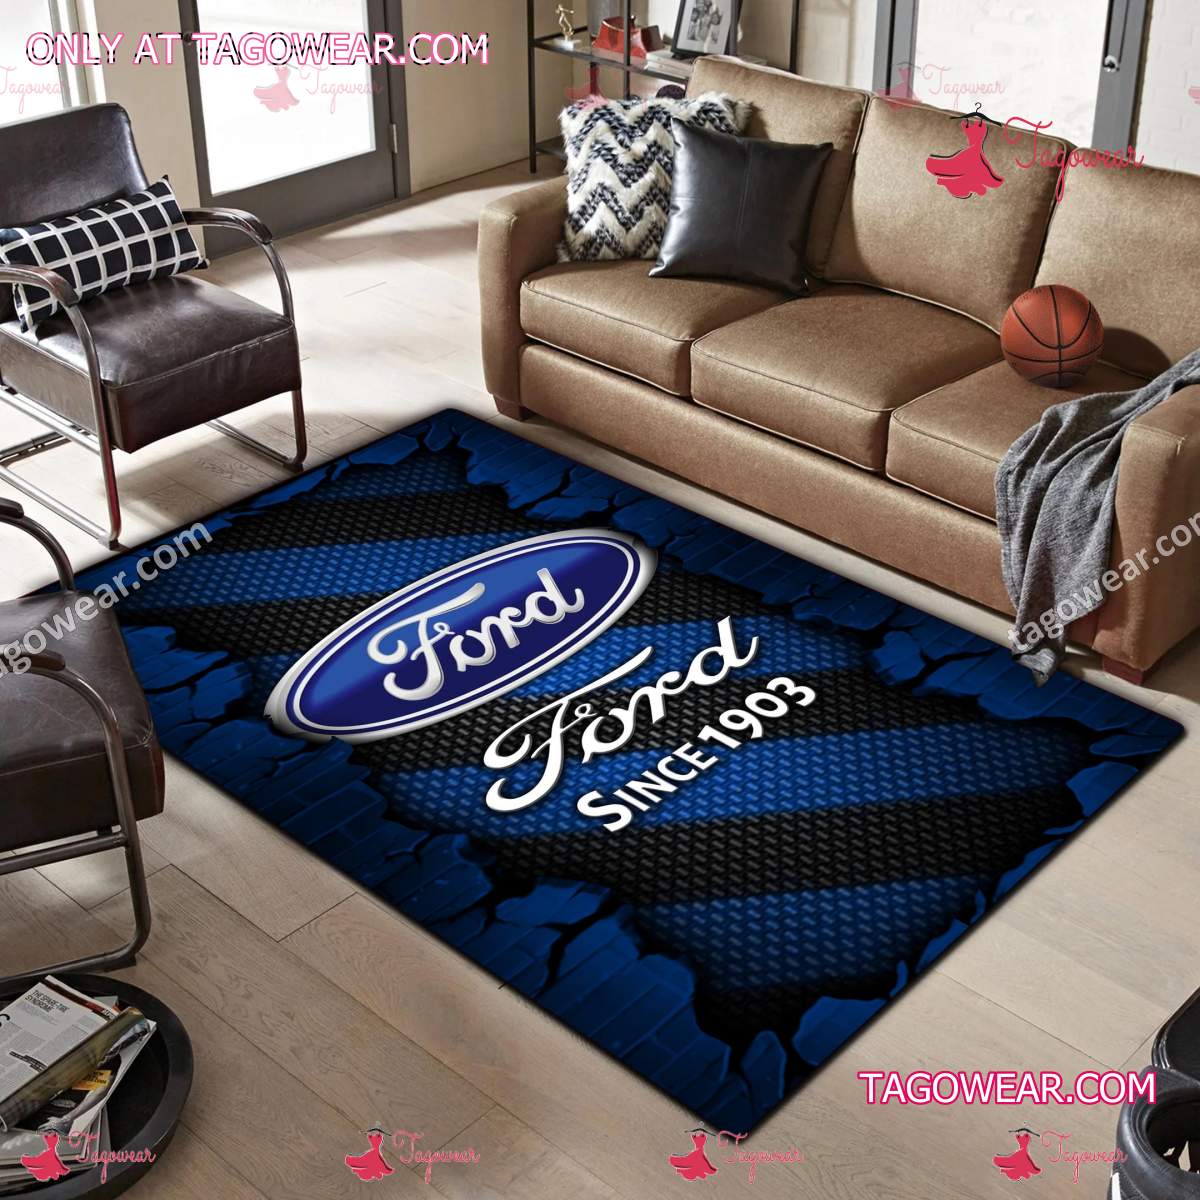 Ford Since 1903 Rug Carpet a